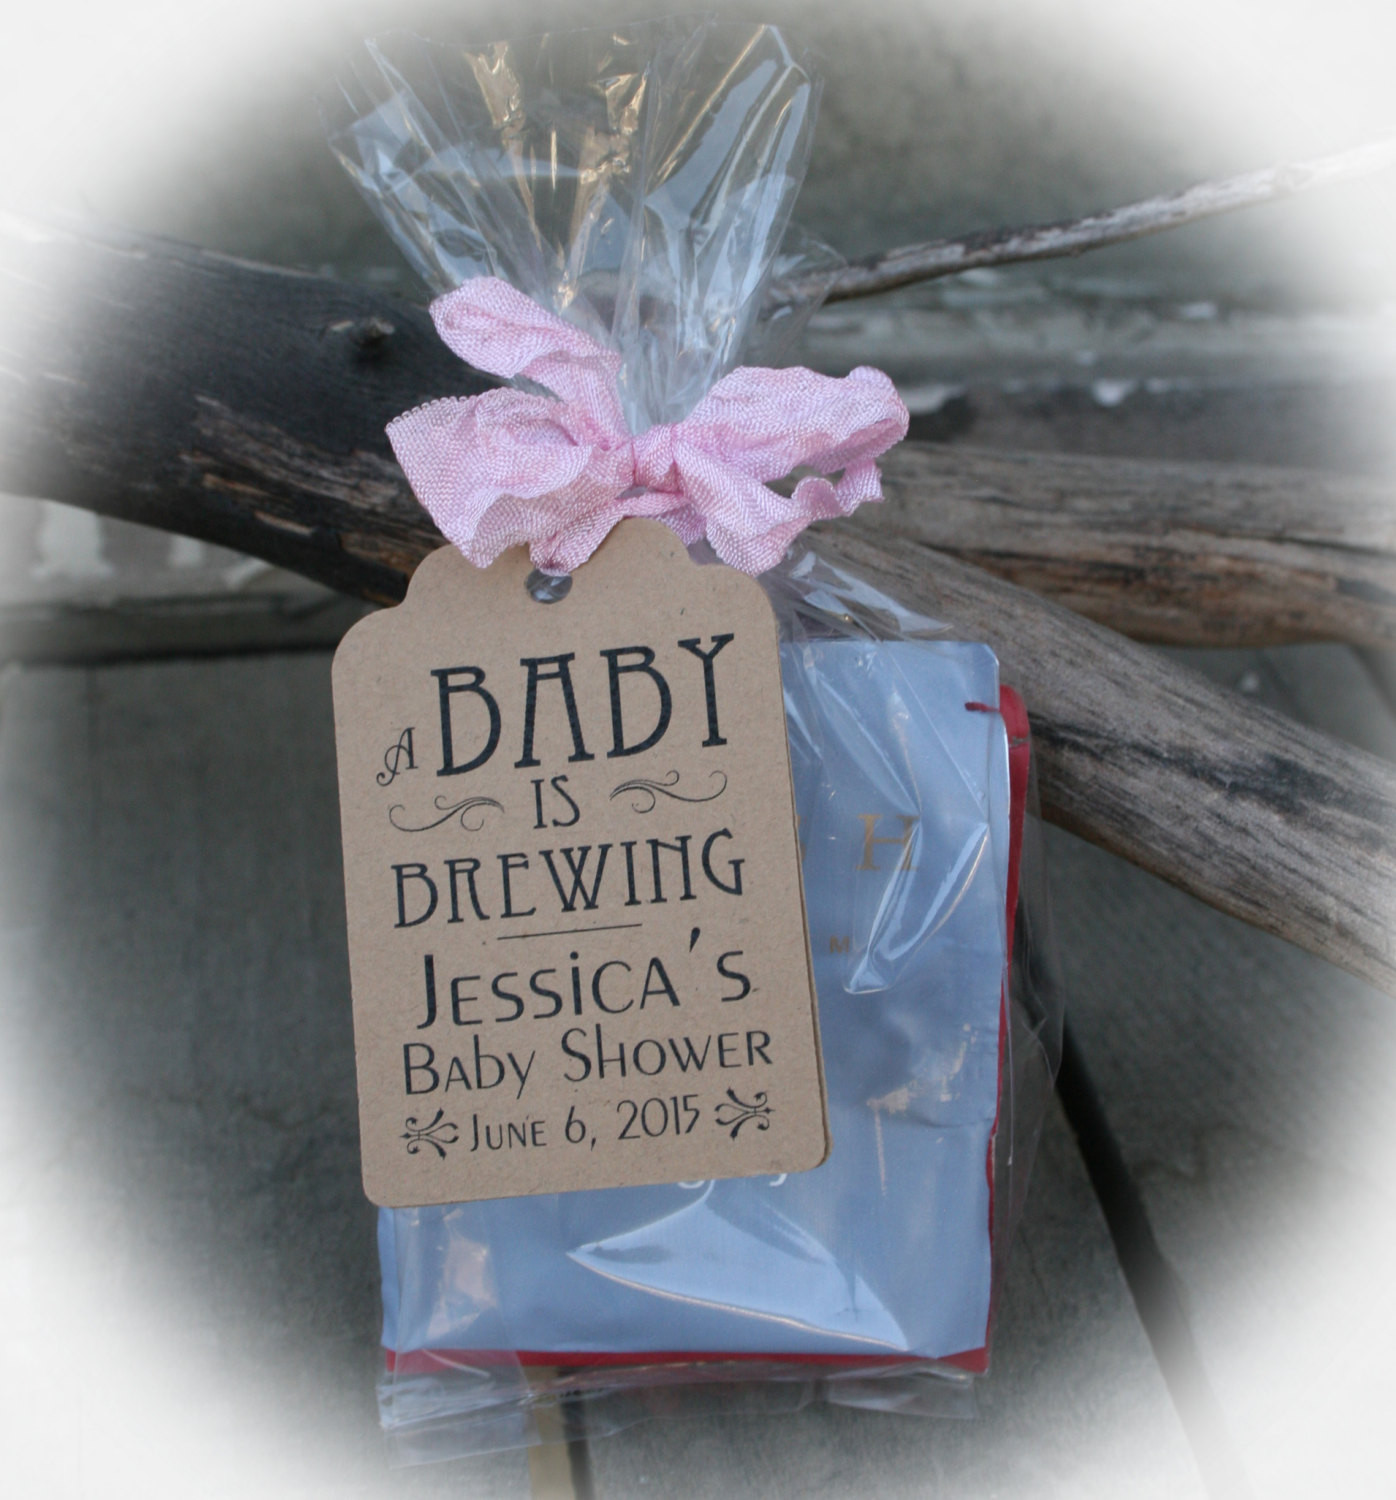 Baby Shower Favor Gift
 A BABY is Brewing Baby Shower Favors DIY Bags Favor Tags